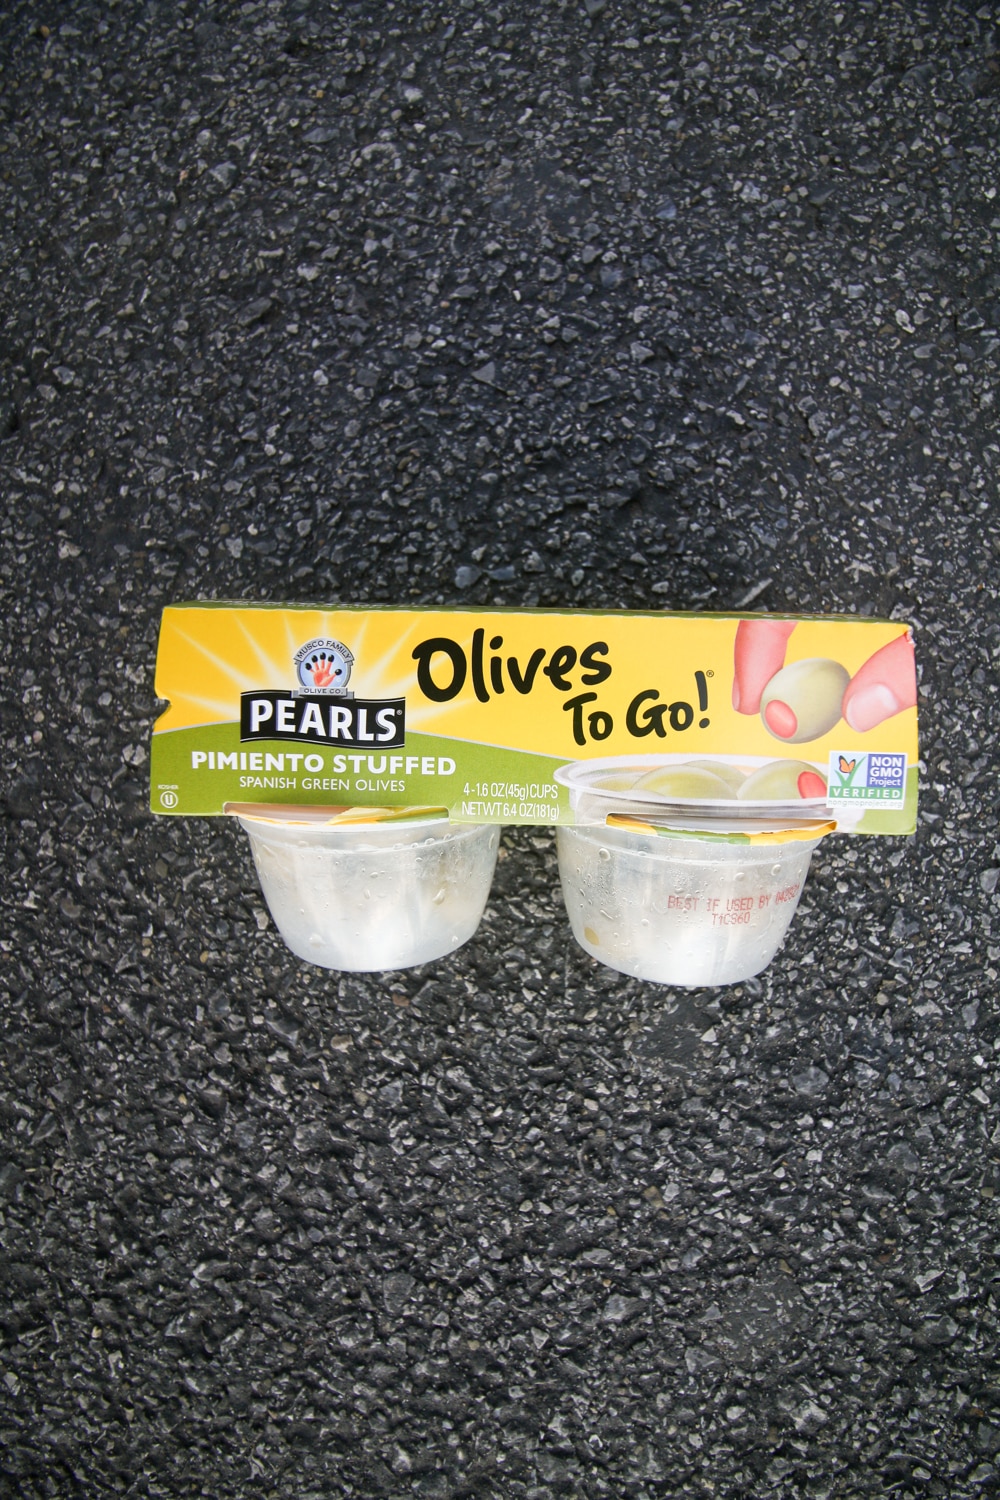 A package of olive snack packs.